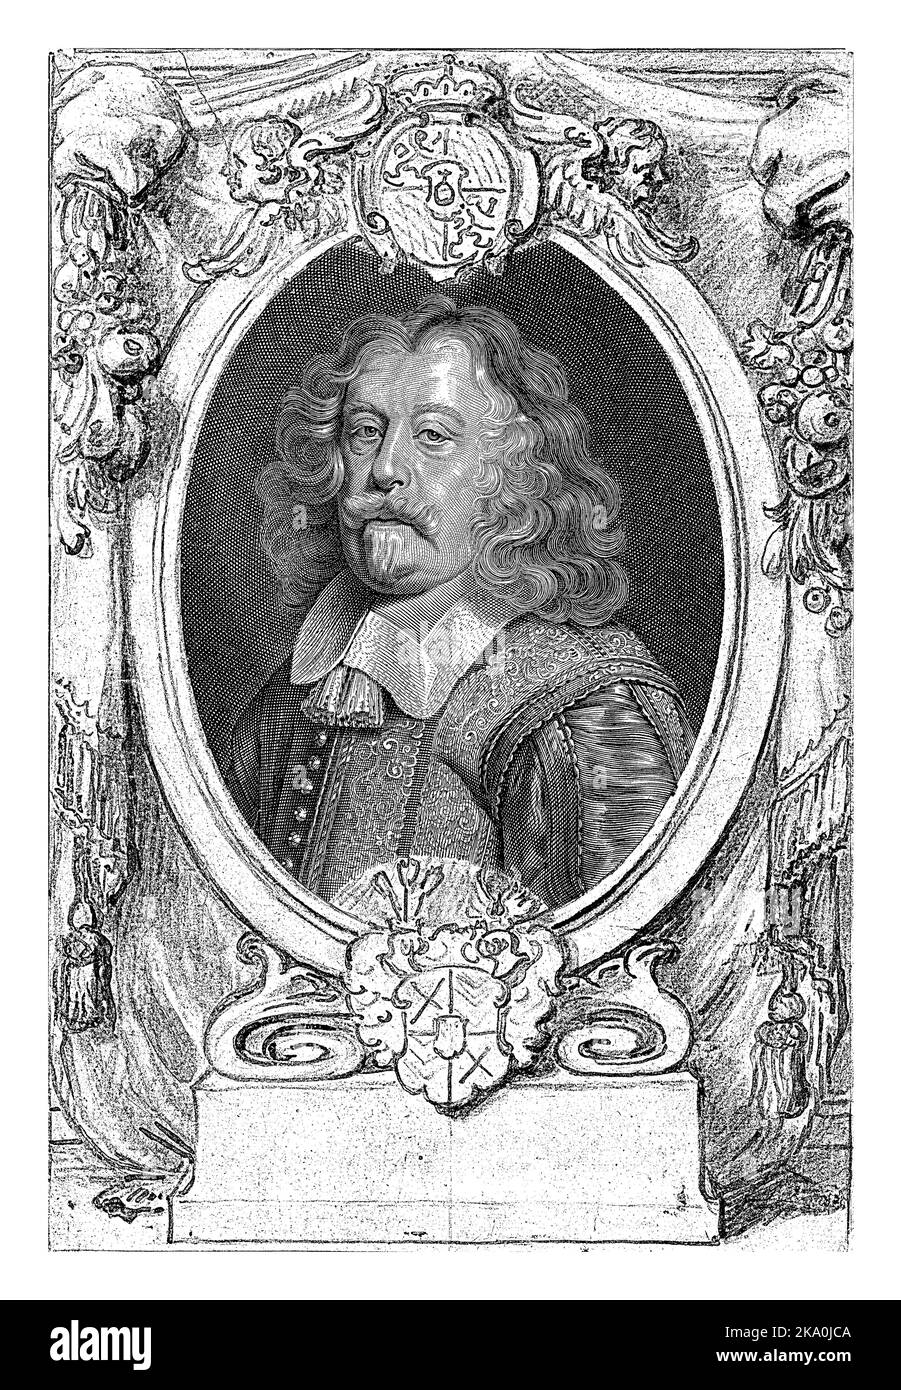 Bust portrait of Maximilian Kurtz von Senftenau. The portrait is set in an oval frame drawn in sepia and black ink with the coat of arms of the person Stock Photo